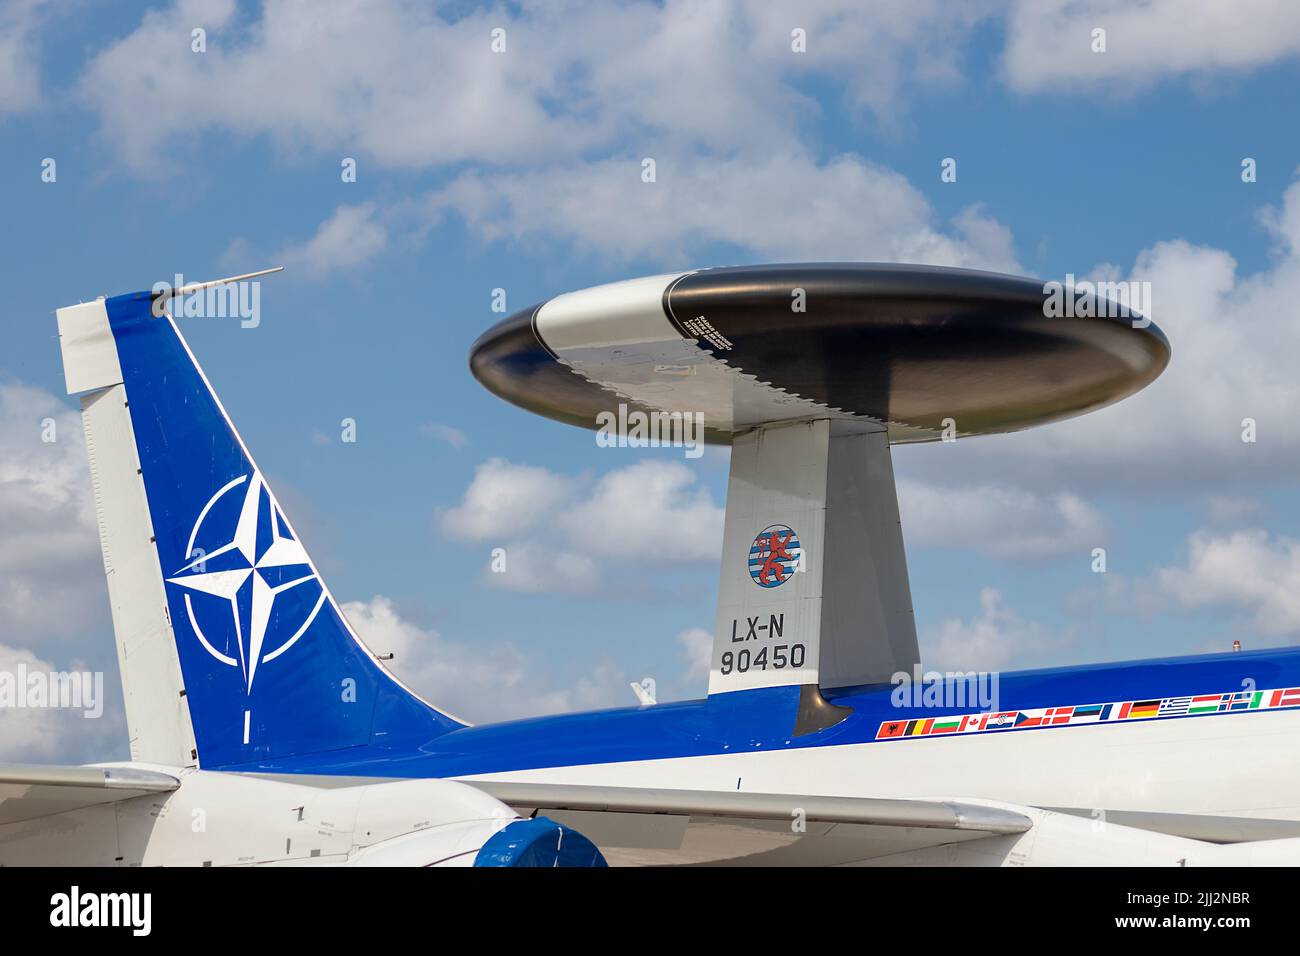 SIAULIAI / LITHUANIA - July 27, 2019: NATO Boeing E-3A AWACS (Airborn Warning & Control System) aircraft static display at air show Falcon Wings 2019 Stock Photo